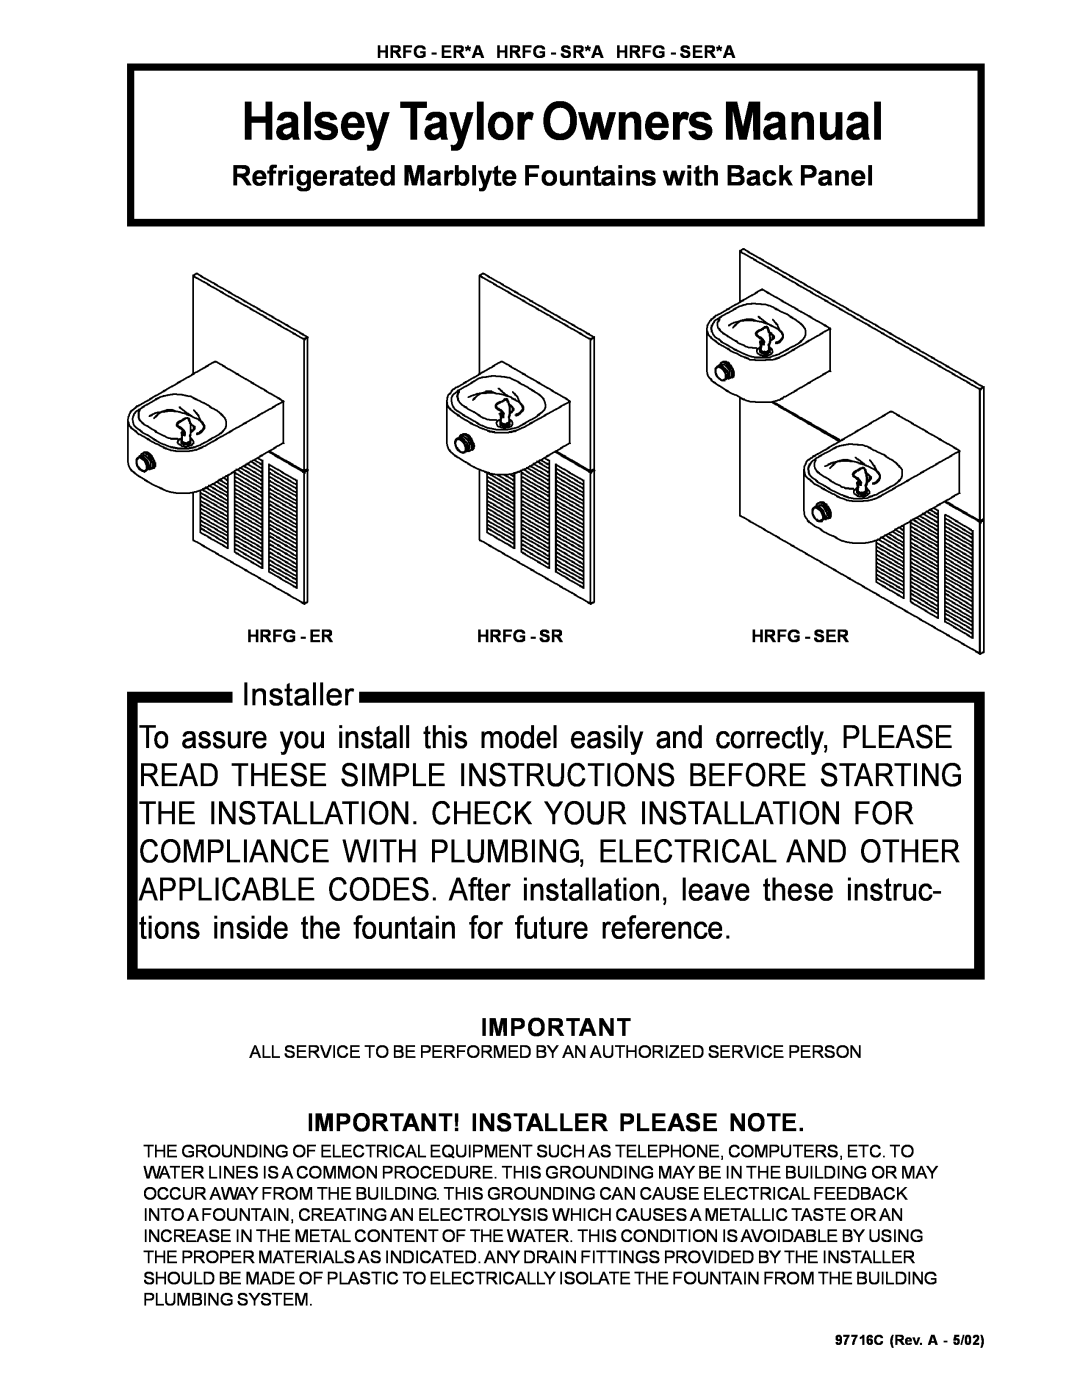 Halsey Taylor HRFG - SR*A owner manual Important! Installer Please Note, Refrigerated Marblyte Fountains with Back Panel 